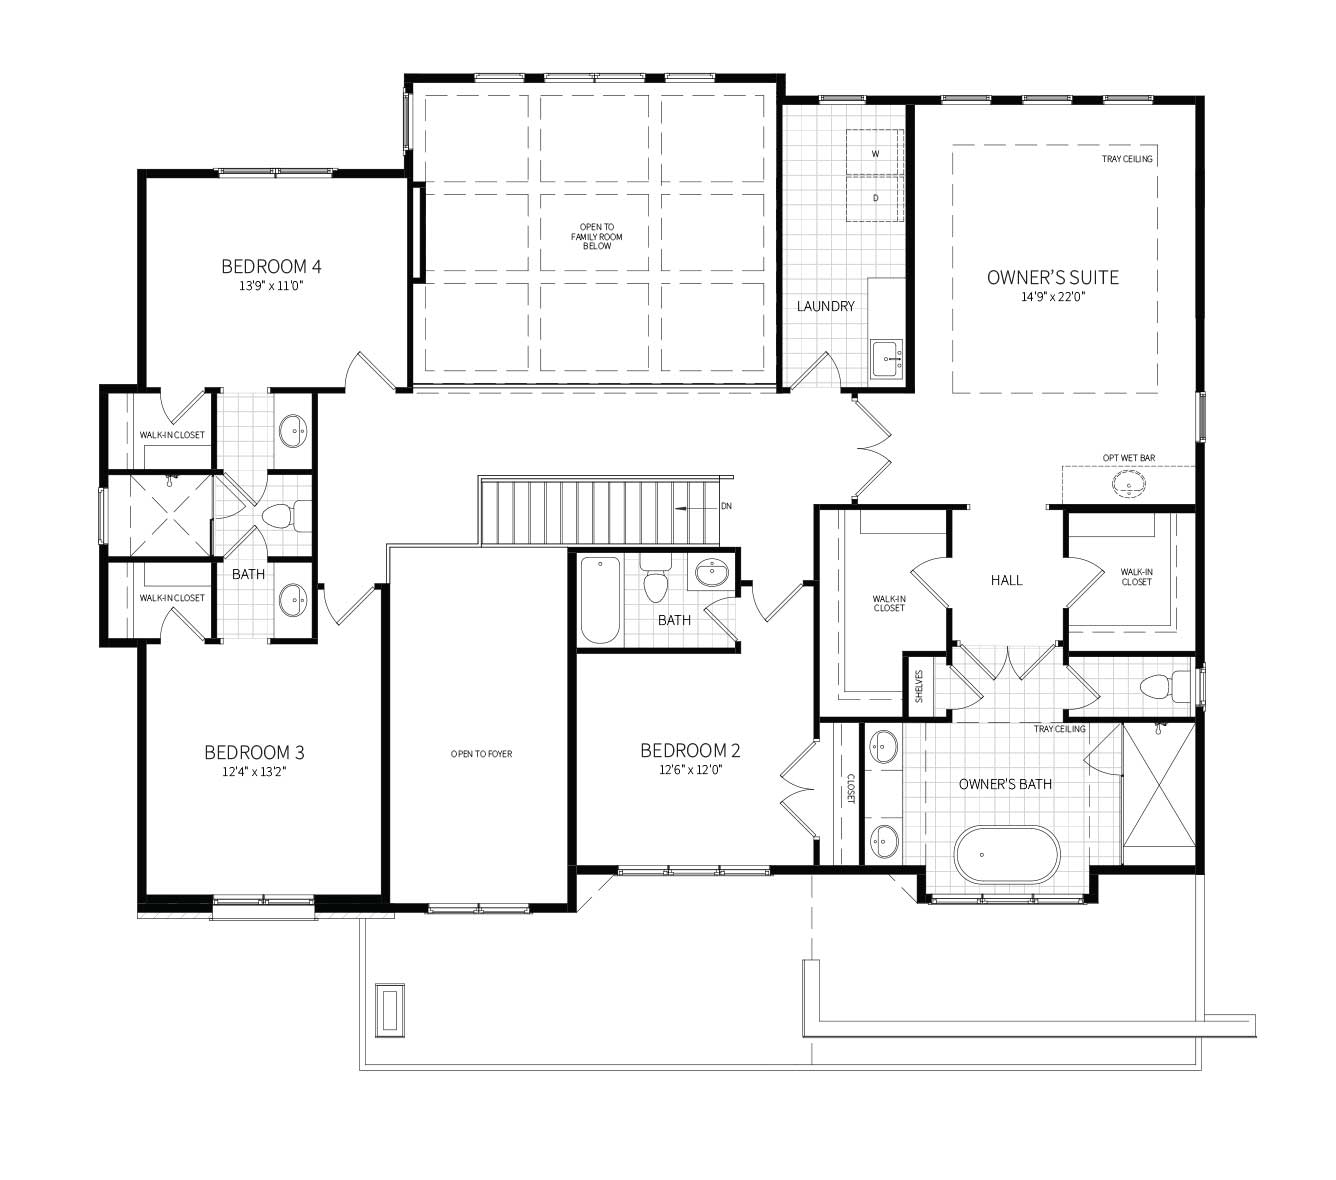 A second floor plan for the home proposed for 10827 Rock Run Dr, a Hampden with expanded Owner's Suite.